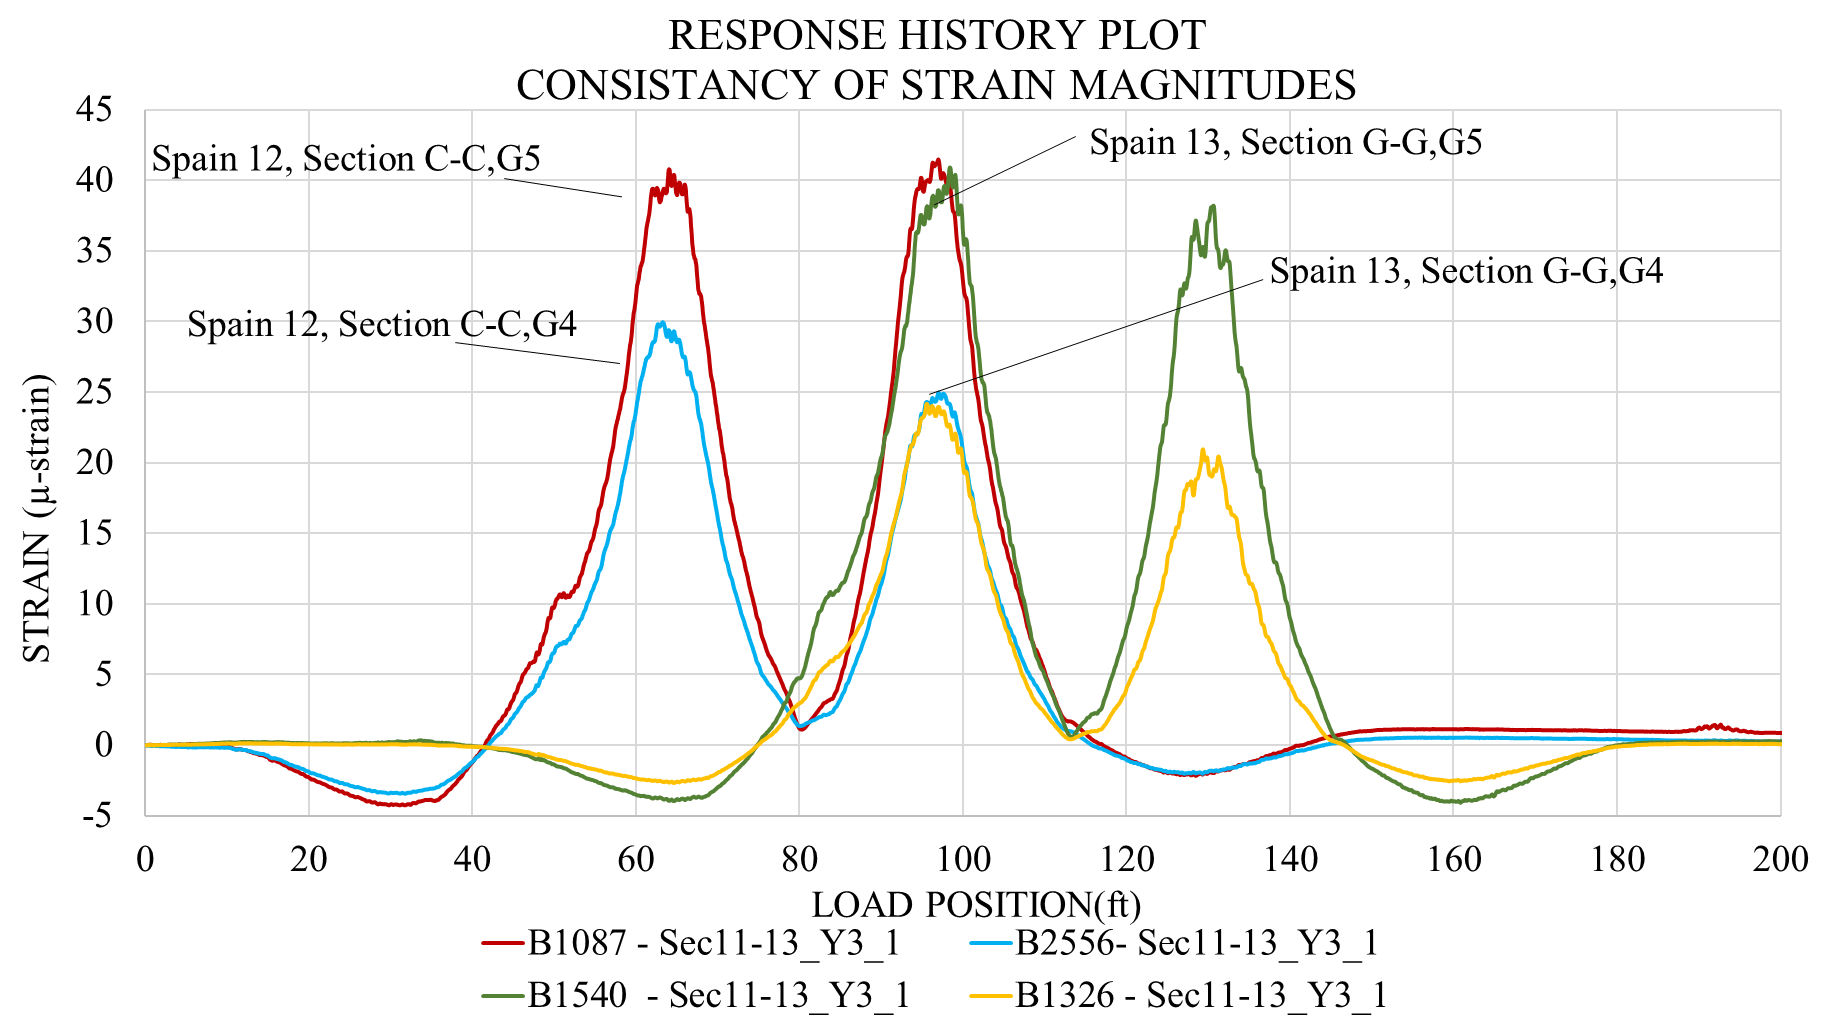 Consistent midspan
strain magnitudes recorded on the “healthy” section.